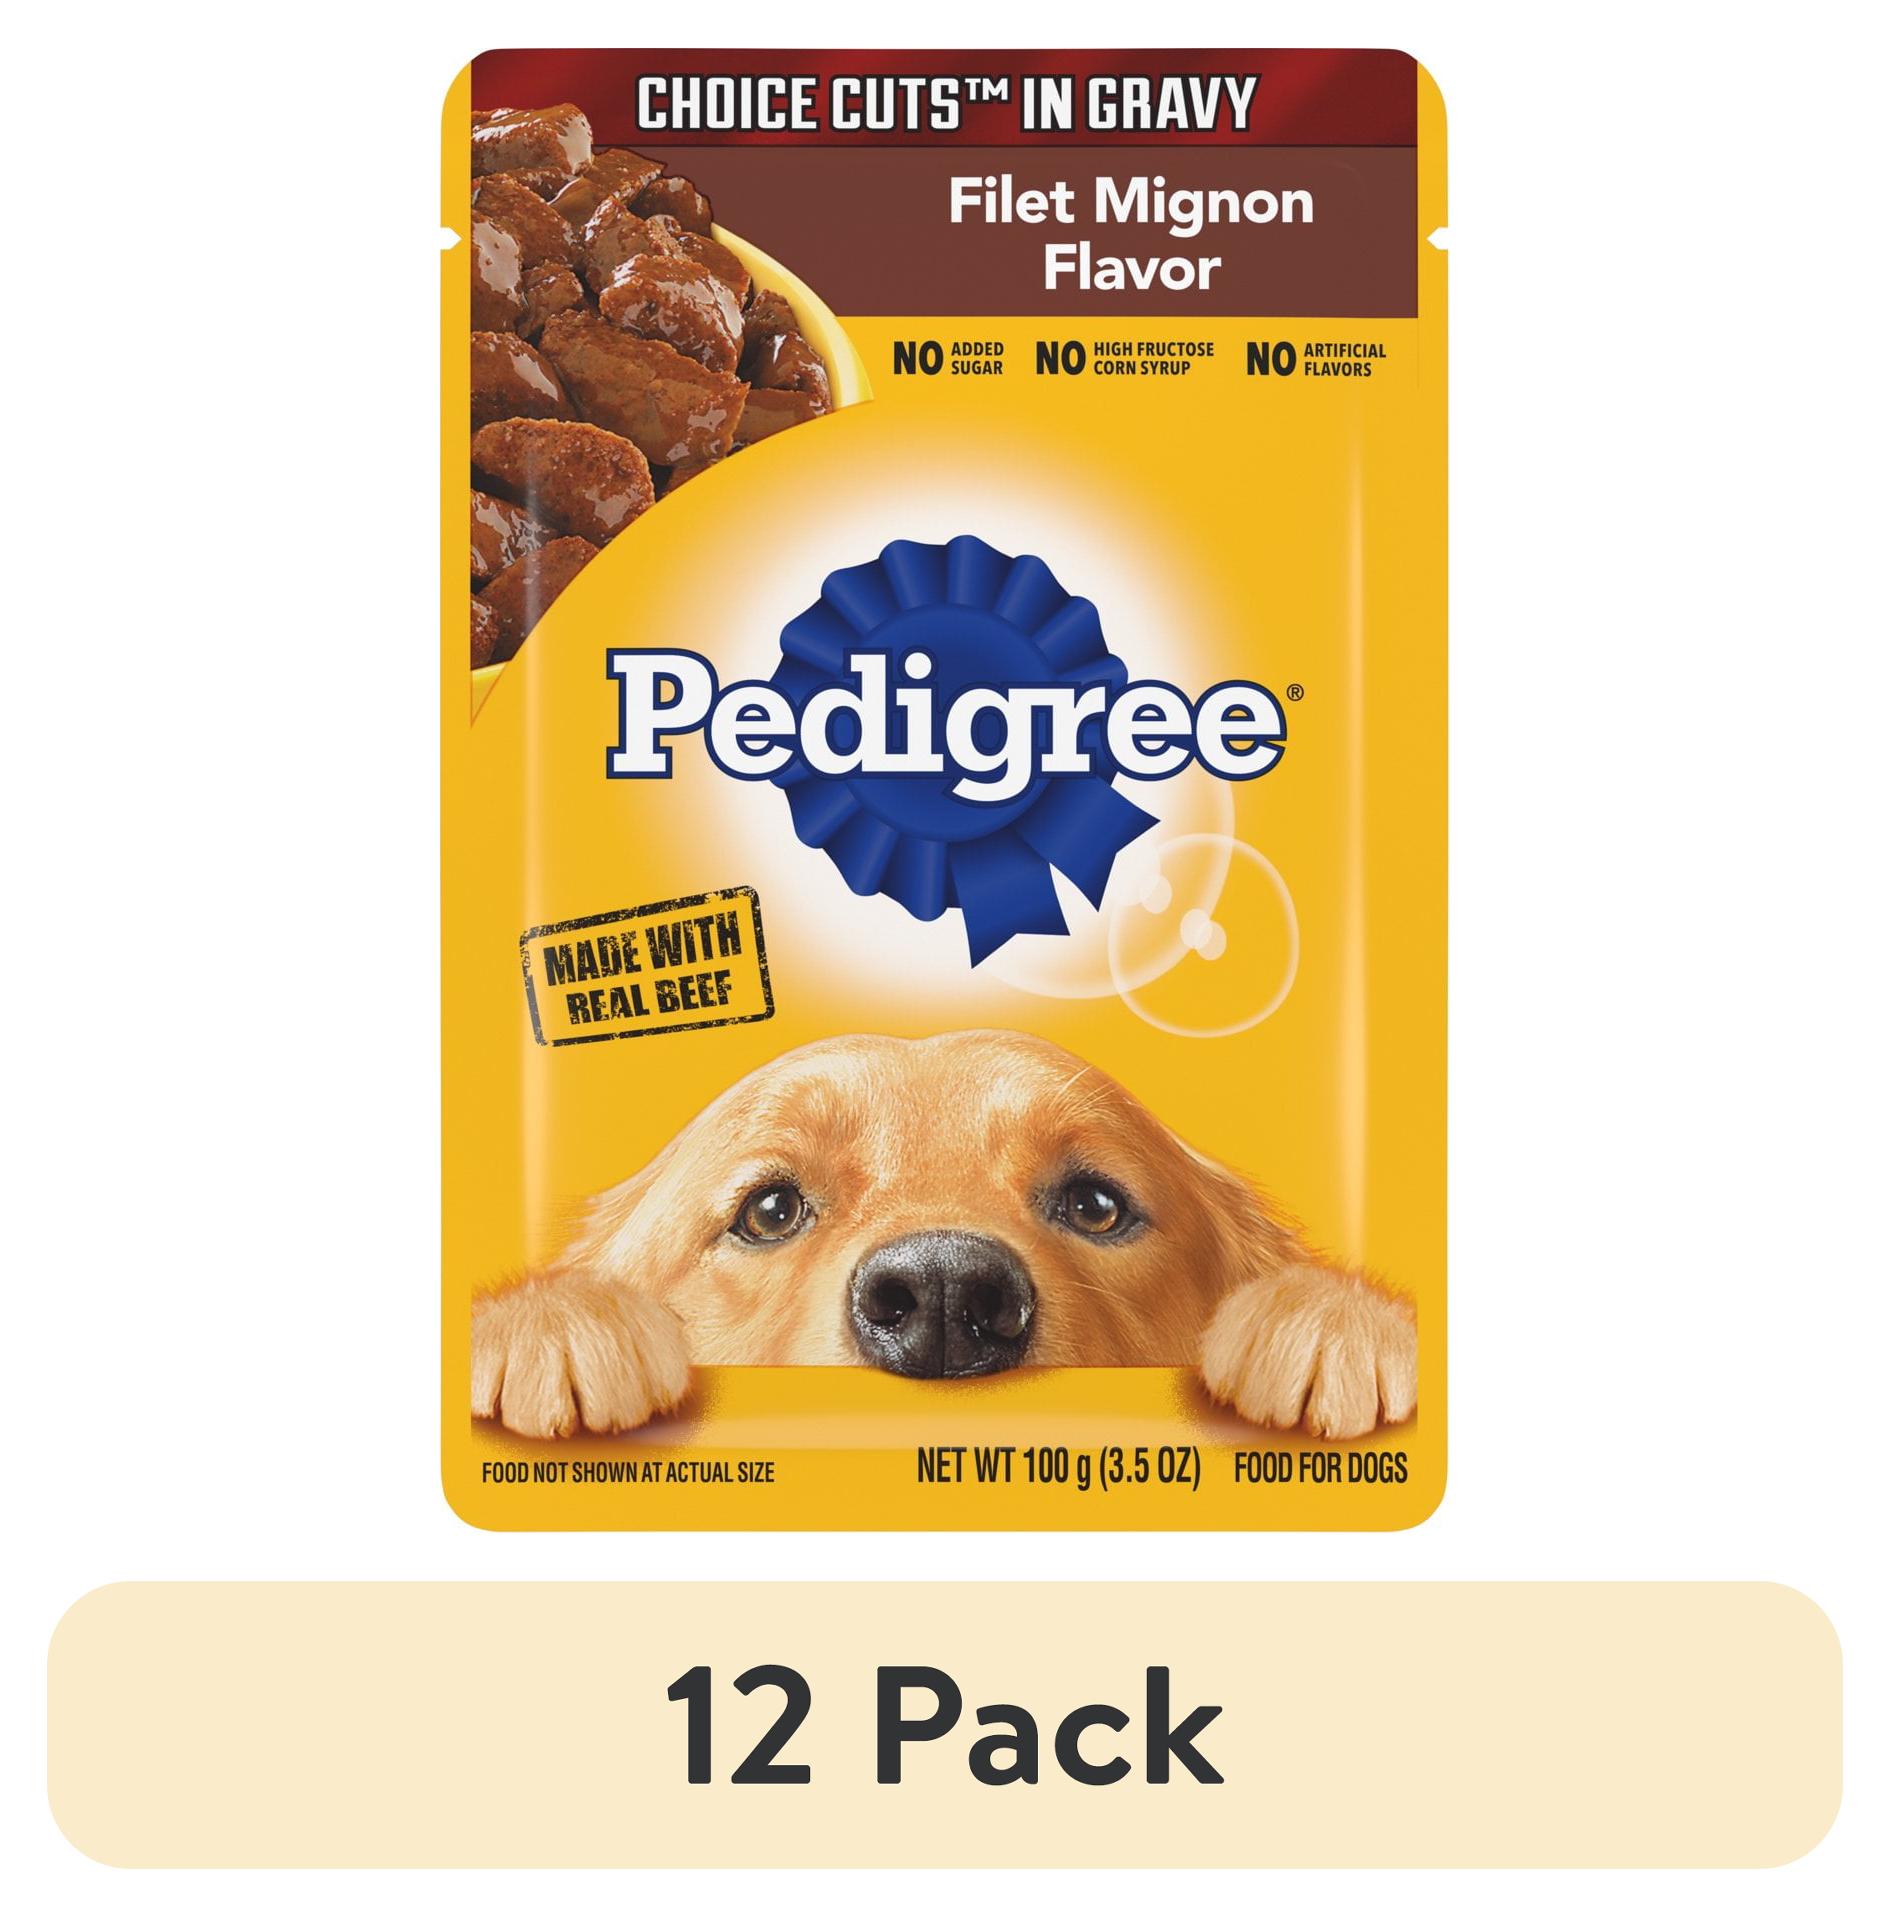 12-Count 3.5-Oz Pedigree Choice Cuts in Gravy Filet Mignon Wet Dog Food $10.44 (.87c Ea) + Free S&H w/ Walmart+ or on $35+